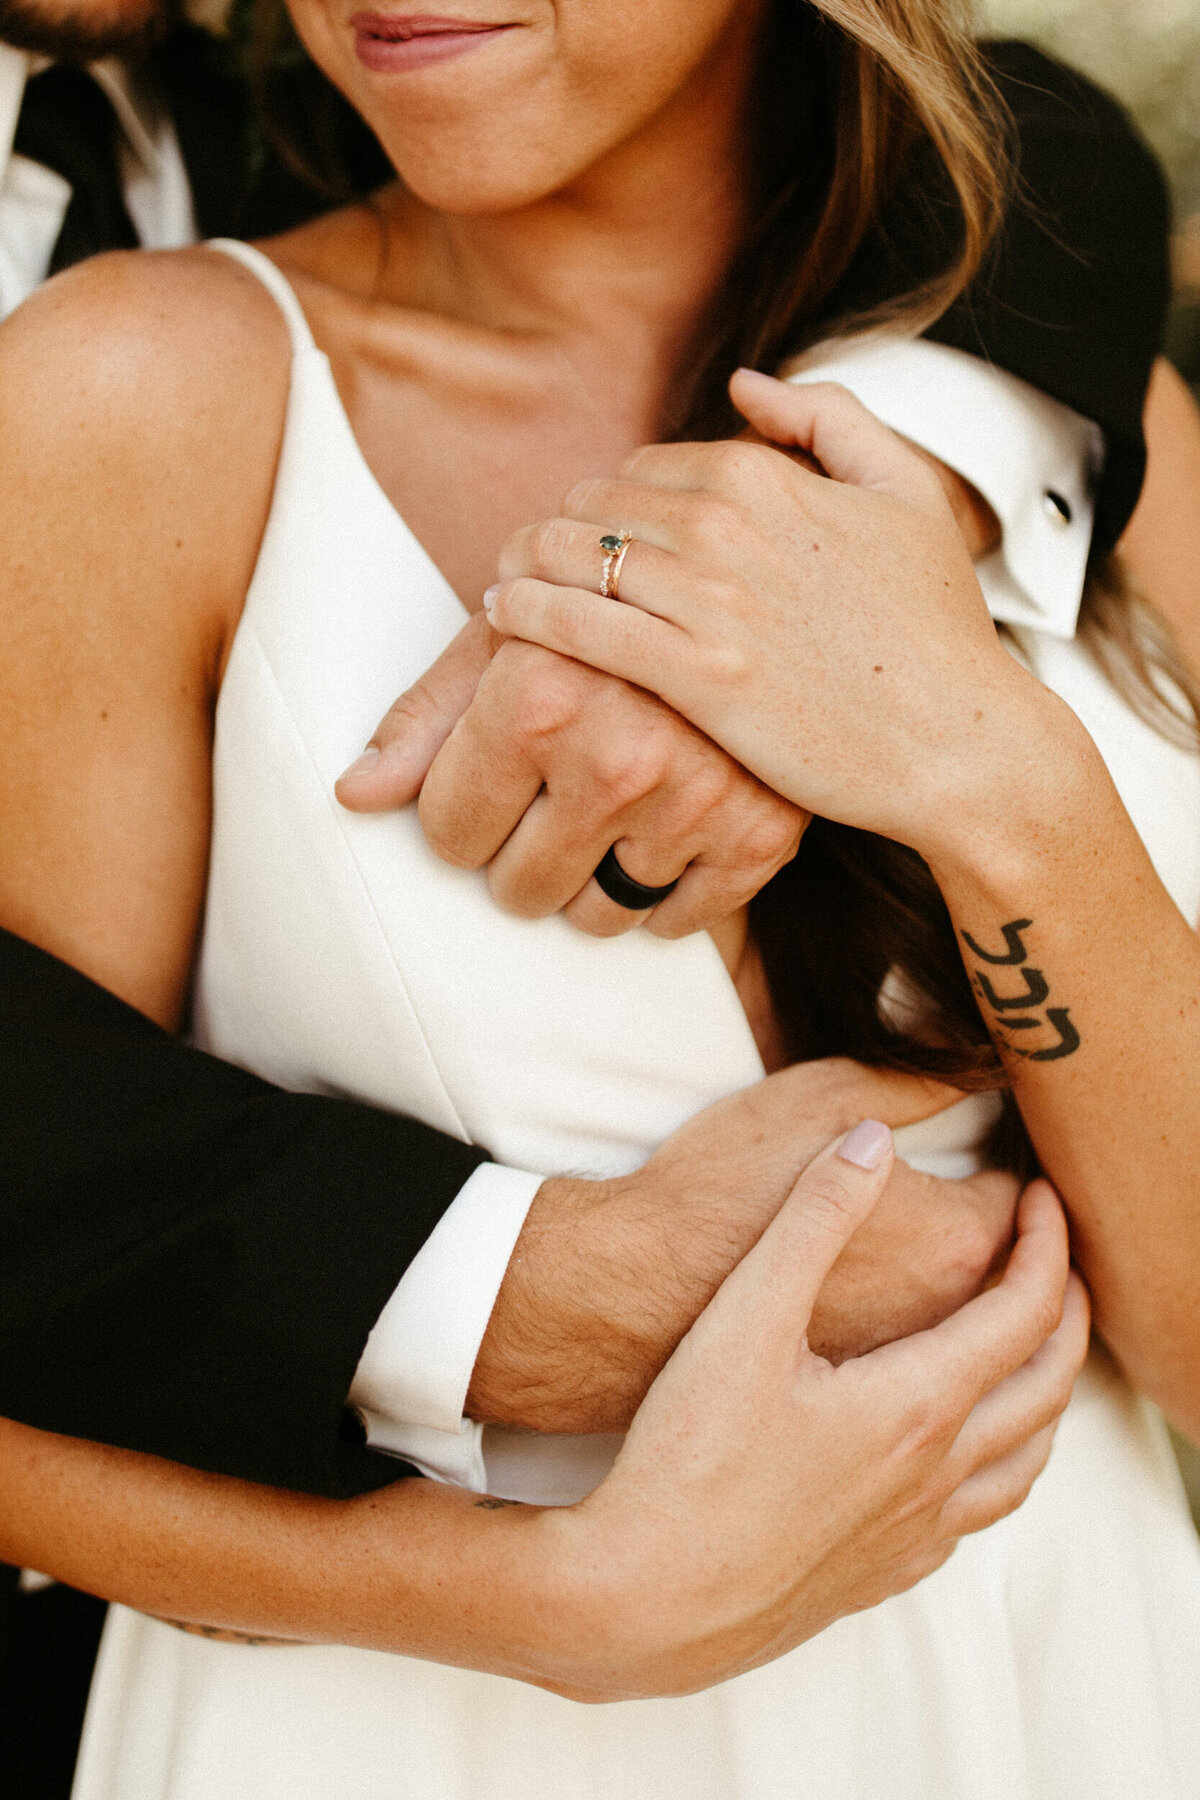 Close up of bride with emerald engagement ring holding her groom's hands as he wraps his arms around her